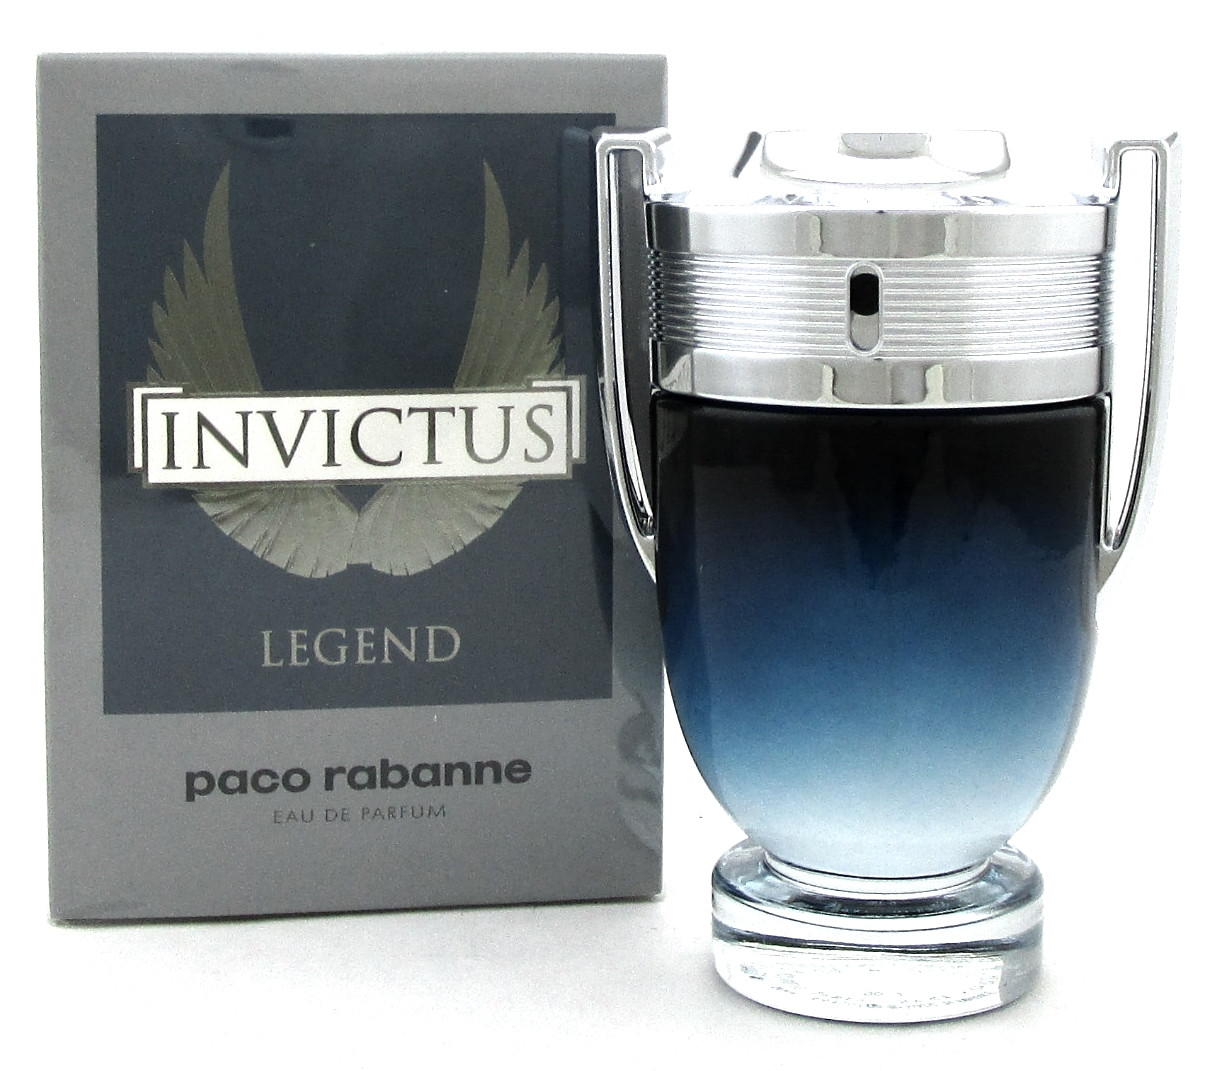 Invictus Legend Cologne by Paco Rabanne 3.4 oz. EDP Spray for Men ...